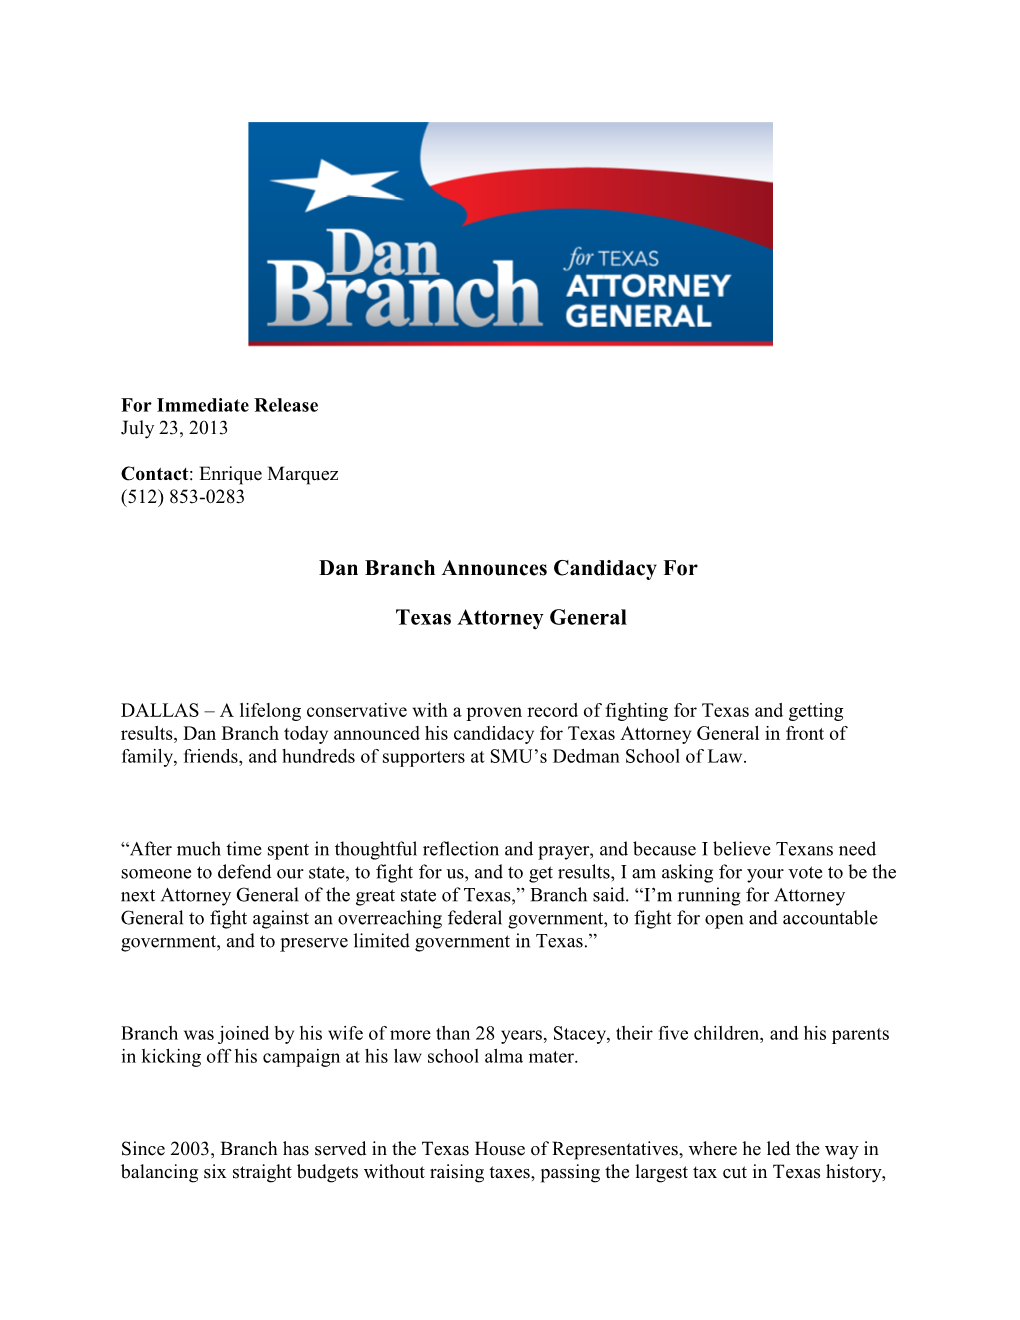 Dan Branch Announces Candidacy for Texas Attorney General